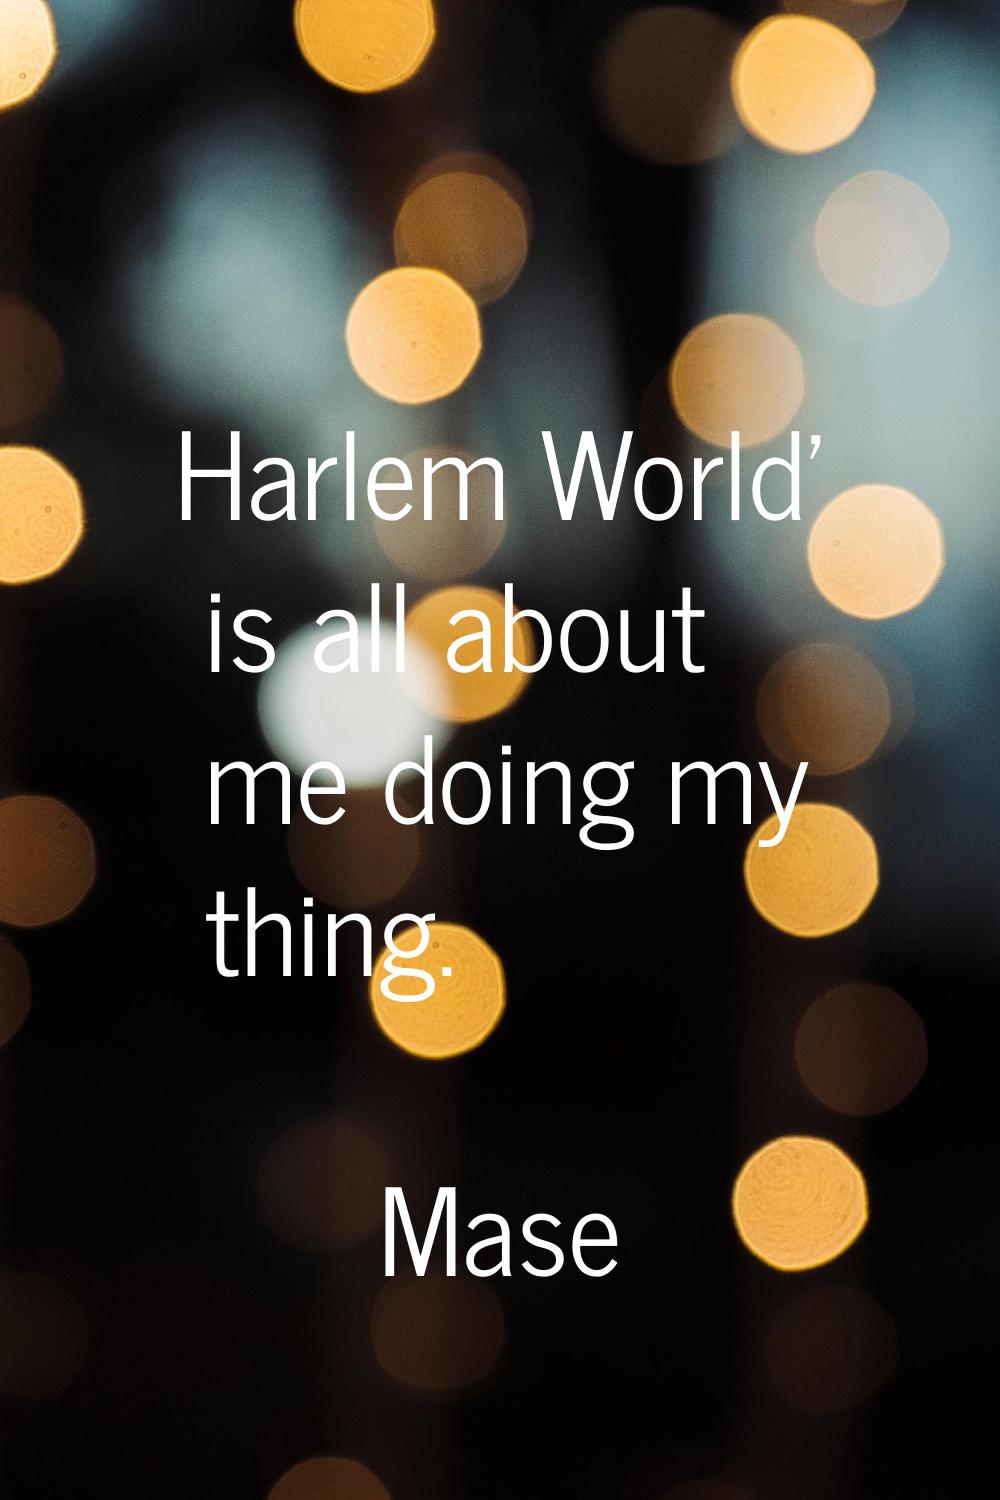 Harlem World' is all about me doing my thing.